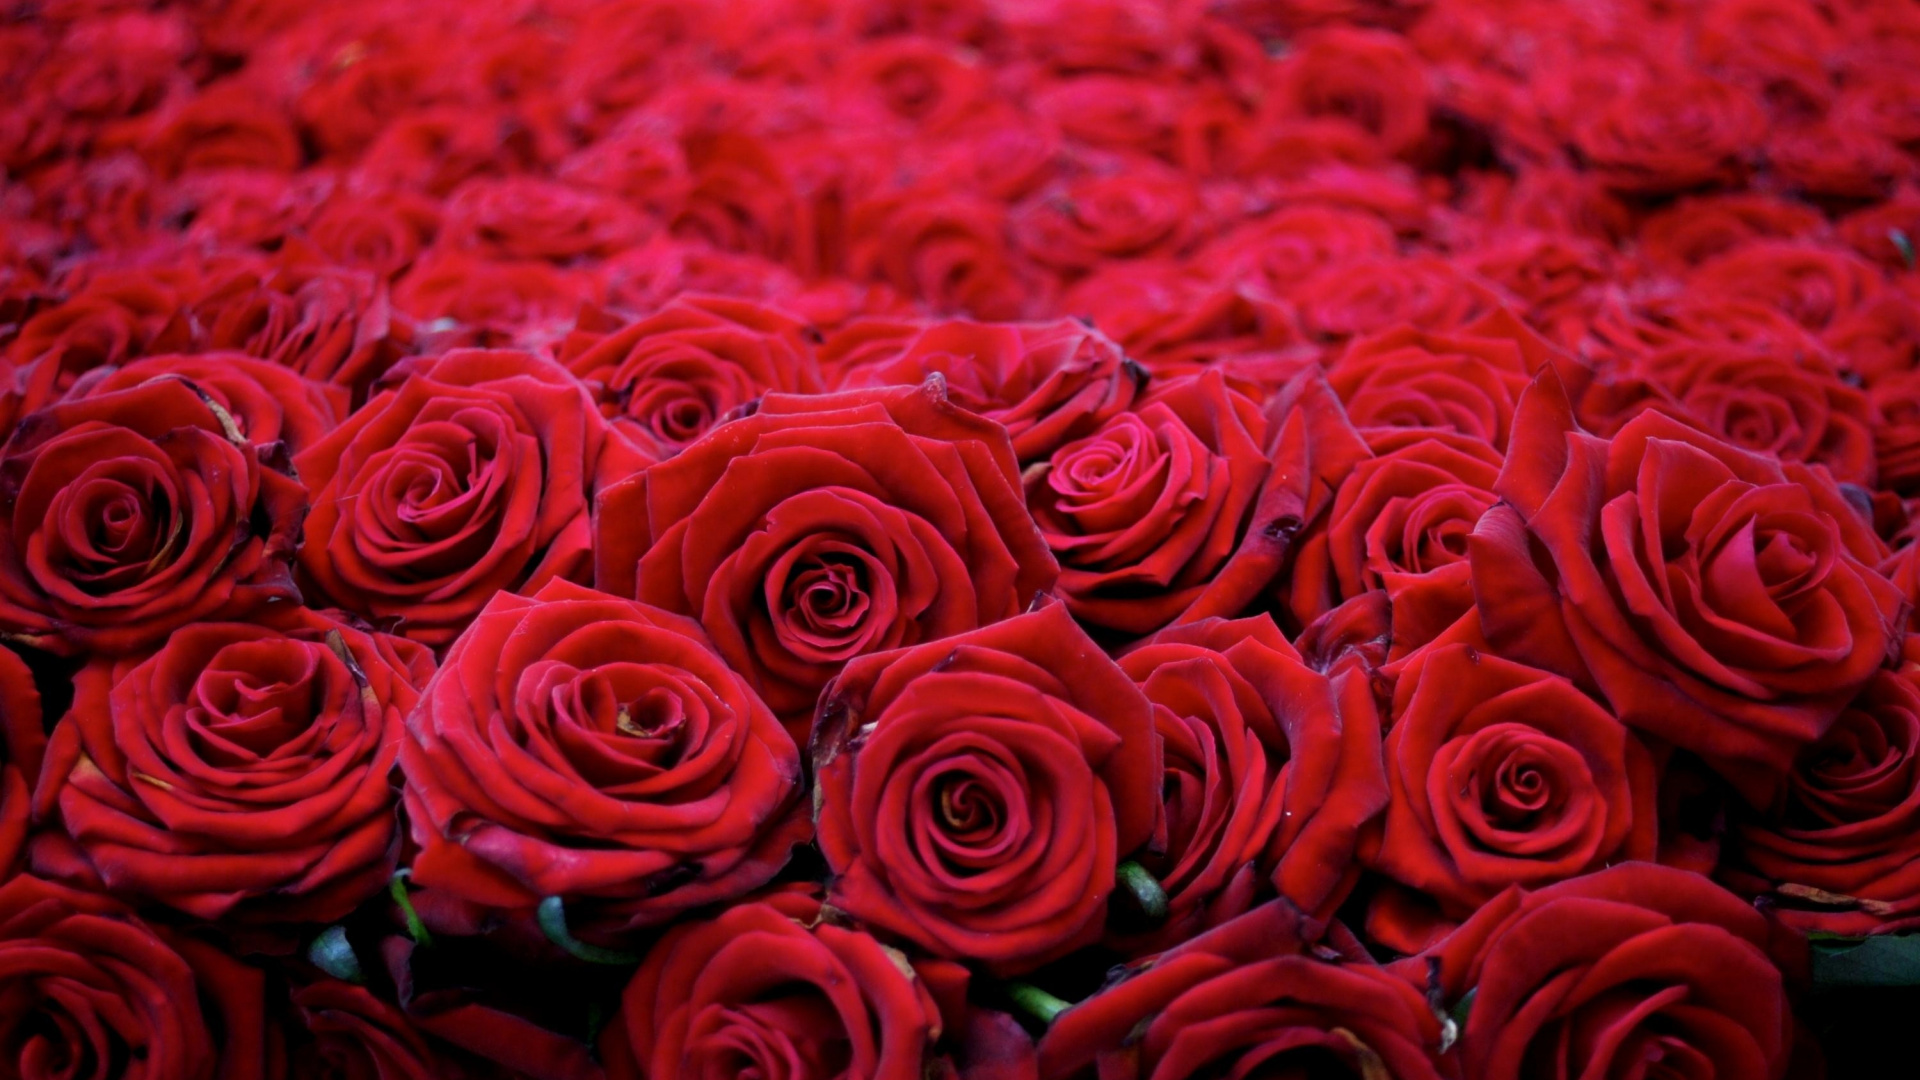 Roses Rouges Sur Textile Rouge. Wallpaper in 1920x1080 Resolution